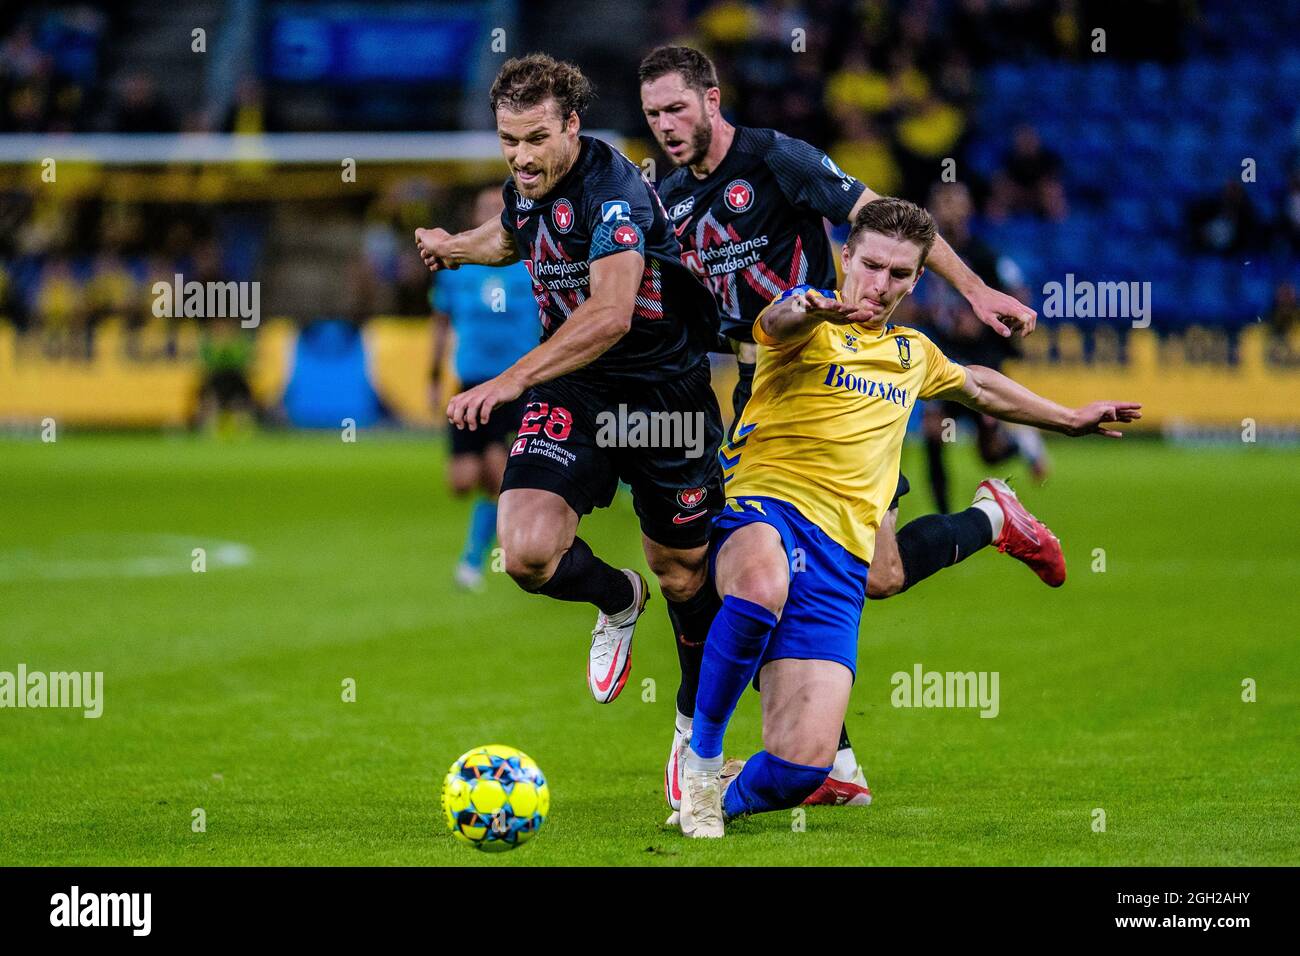 Brondby, Denmark. 29th, August 2021. Mikael Uhre (11) Broendby IF and Erik Sviatchenko (28) of FC Midtjylland seen during the 3F Superliga match between Broendby IF and Midtjylland at Brondby